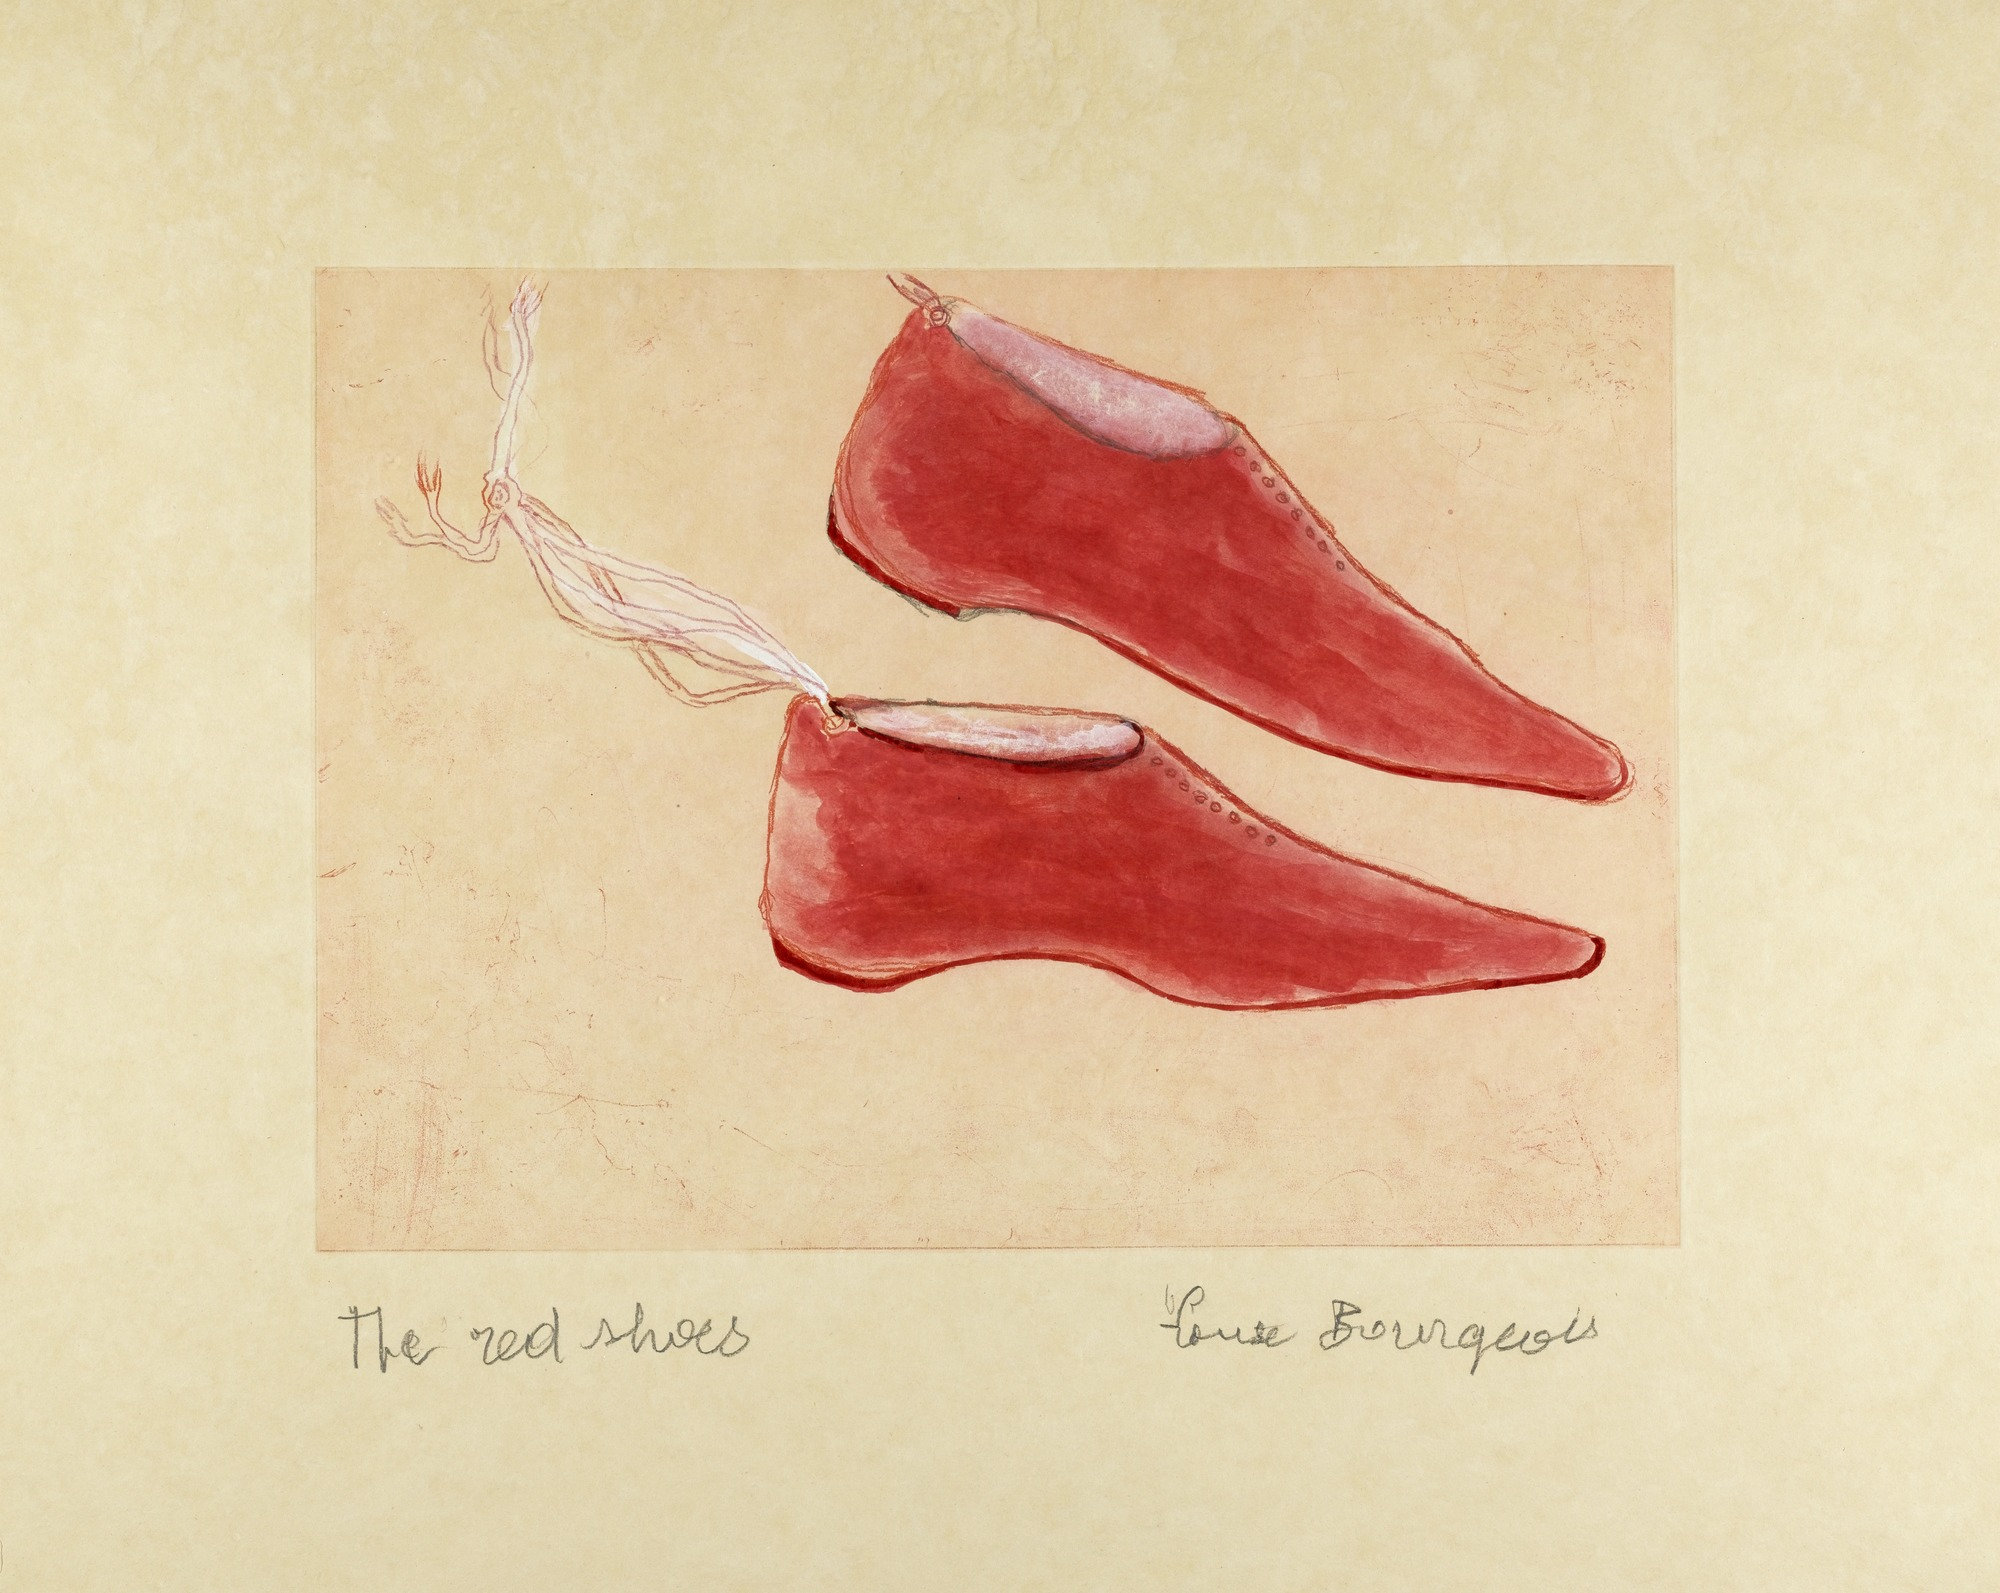 Louise Bourgeois, 'The Red Shoes,' 2005. Courtesy of the Museum of Modern Art.